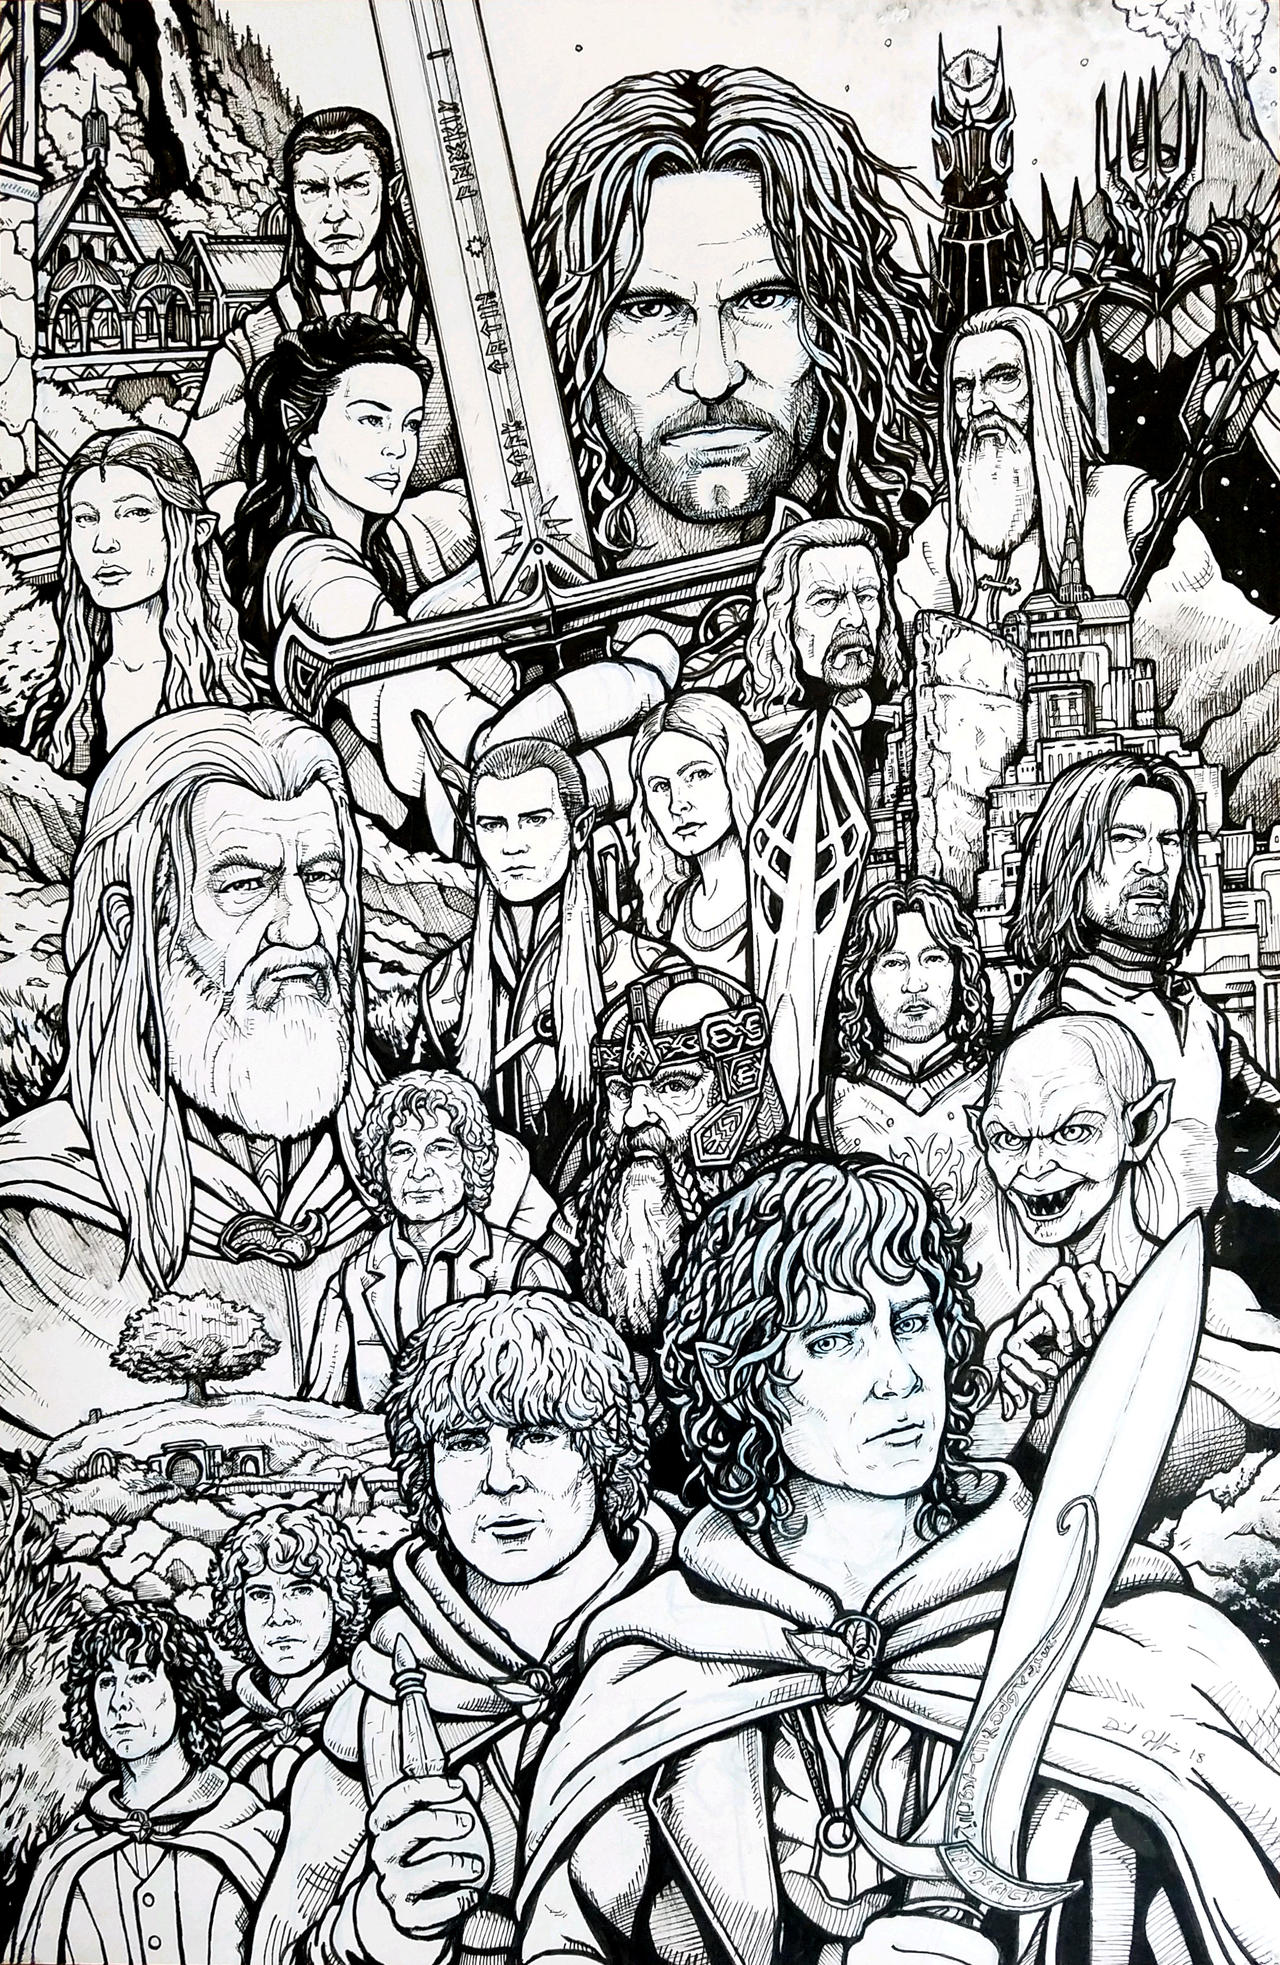 Lord of the rings by daniel